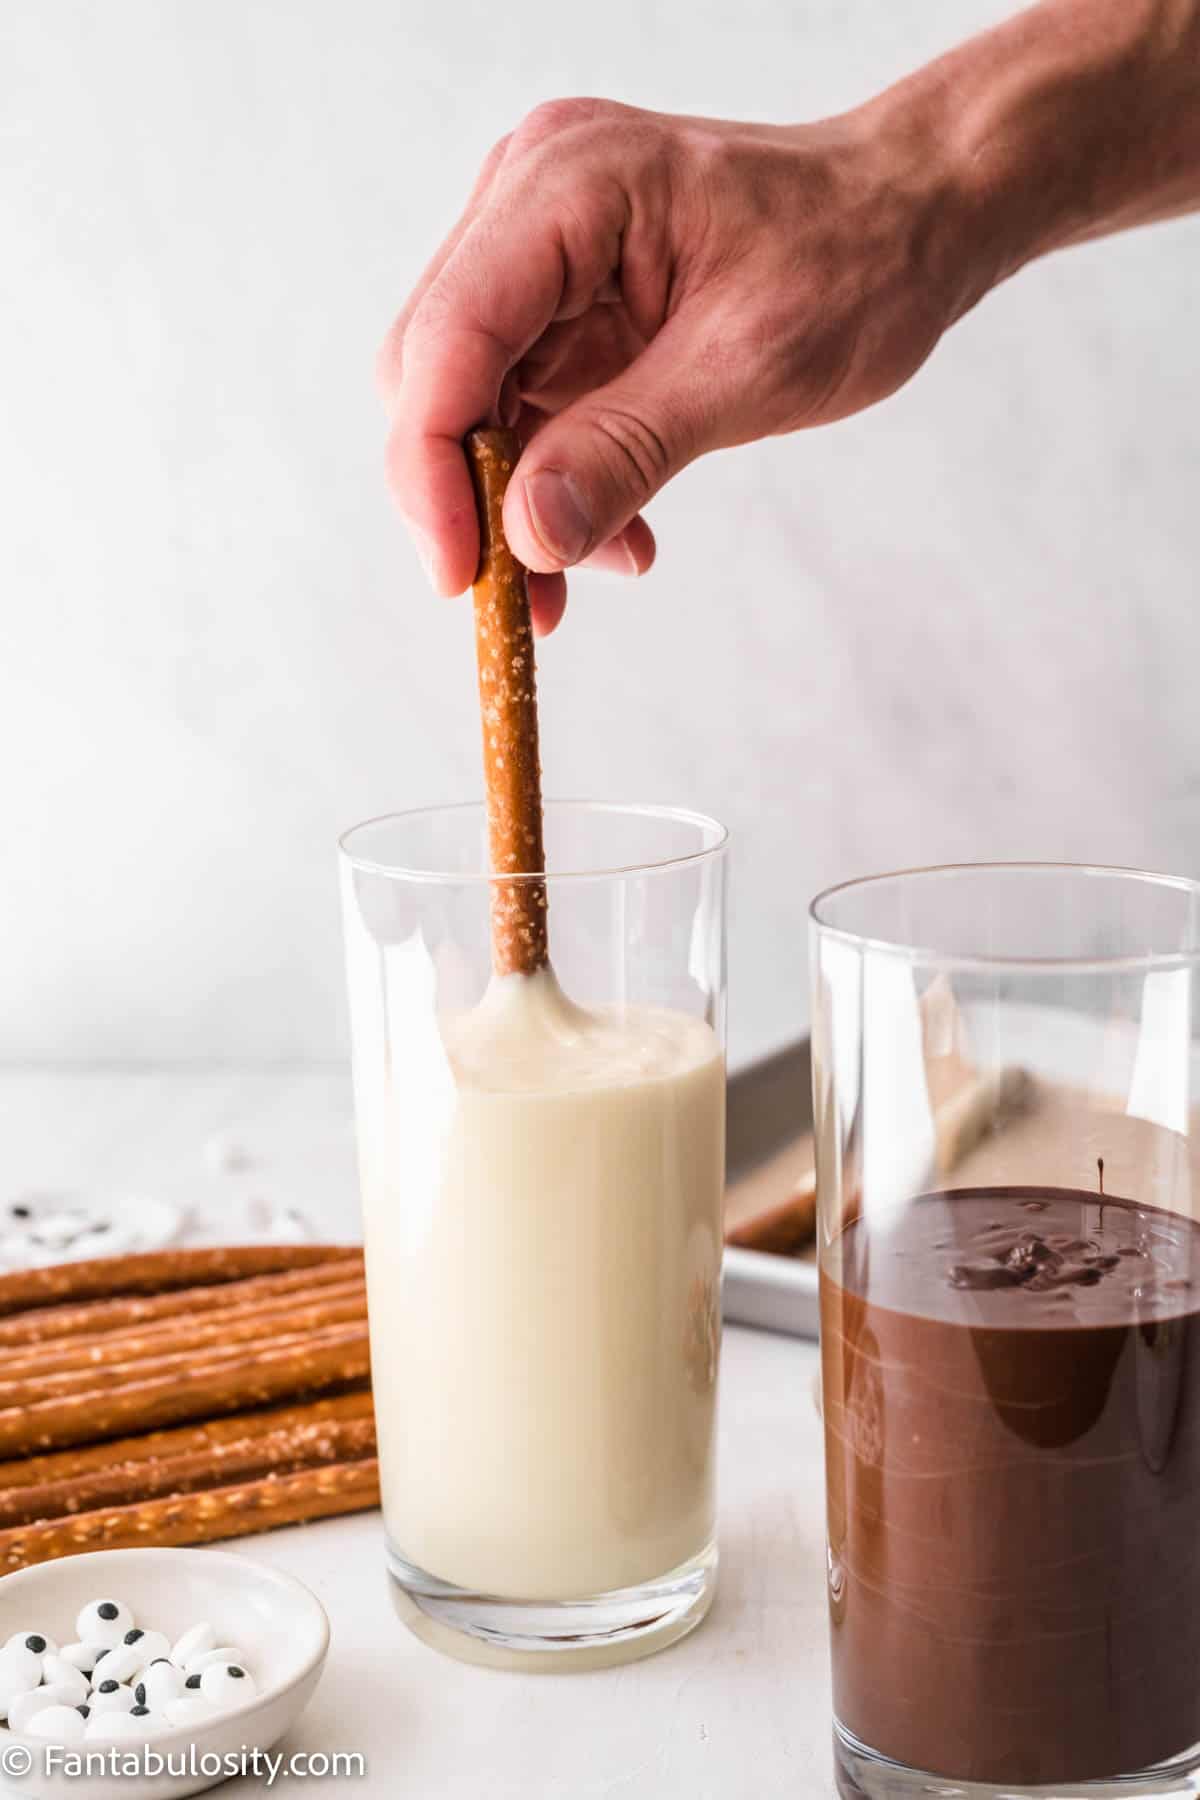 A hand holding a prezel rod is dipping it in a tall thin glass filled with melted white chocolate. A glass of melted dark chocolate, candy eyes and pretzel rods are also in the photo